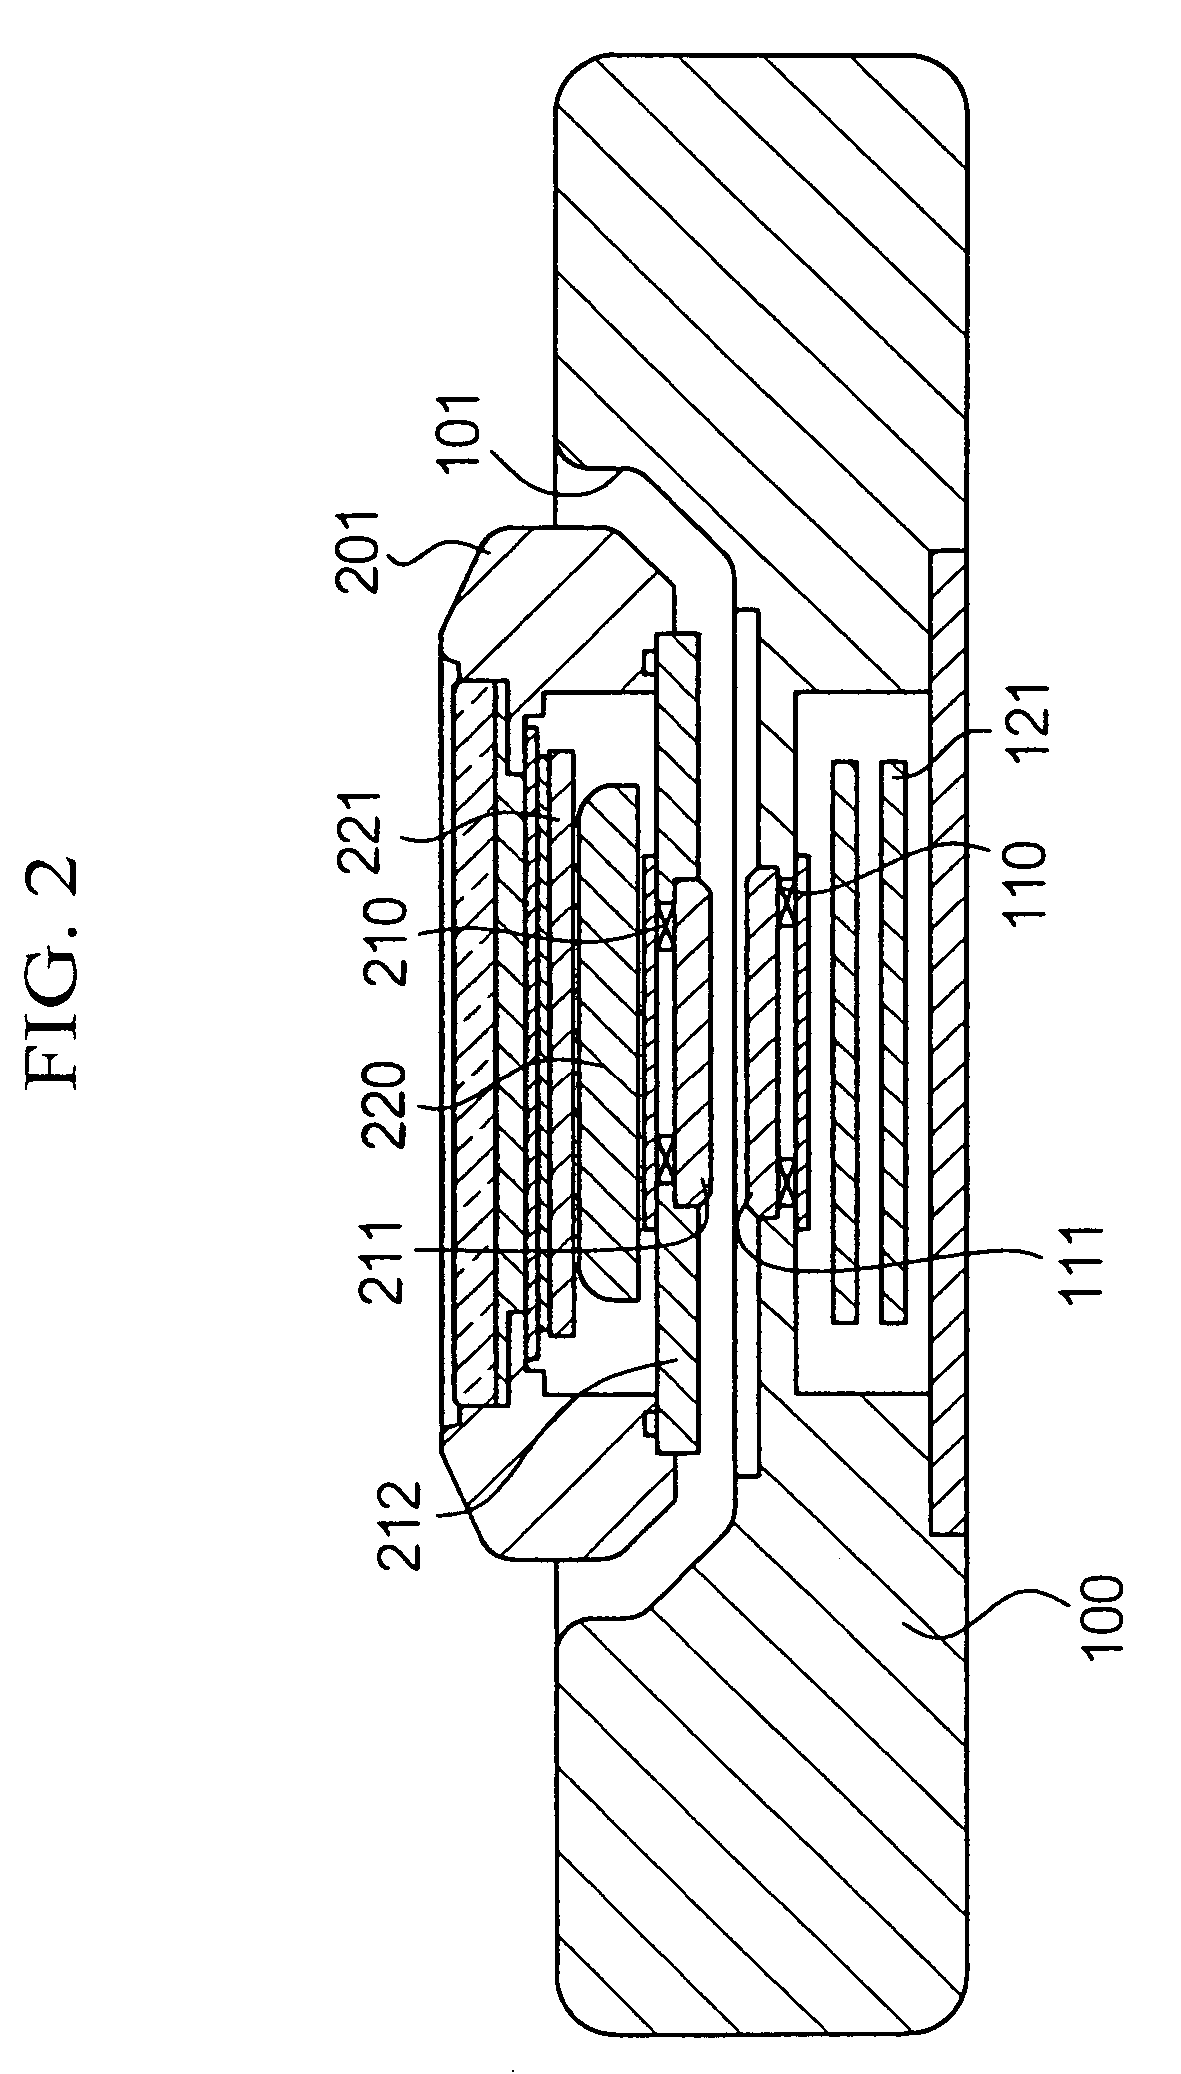 Apparatus for selecting and outputting either a first clock signal or a second clock signal